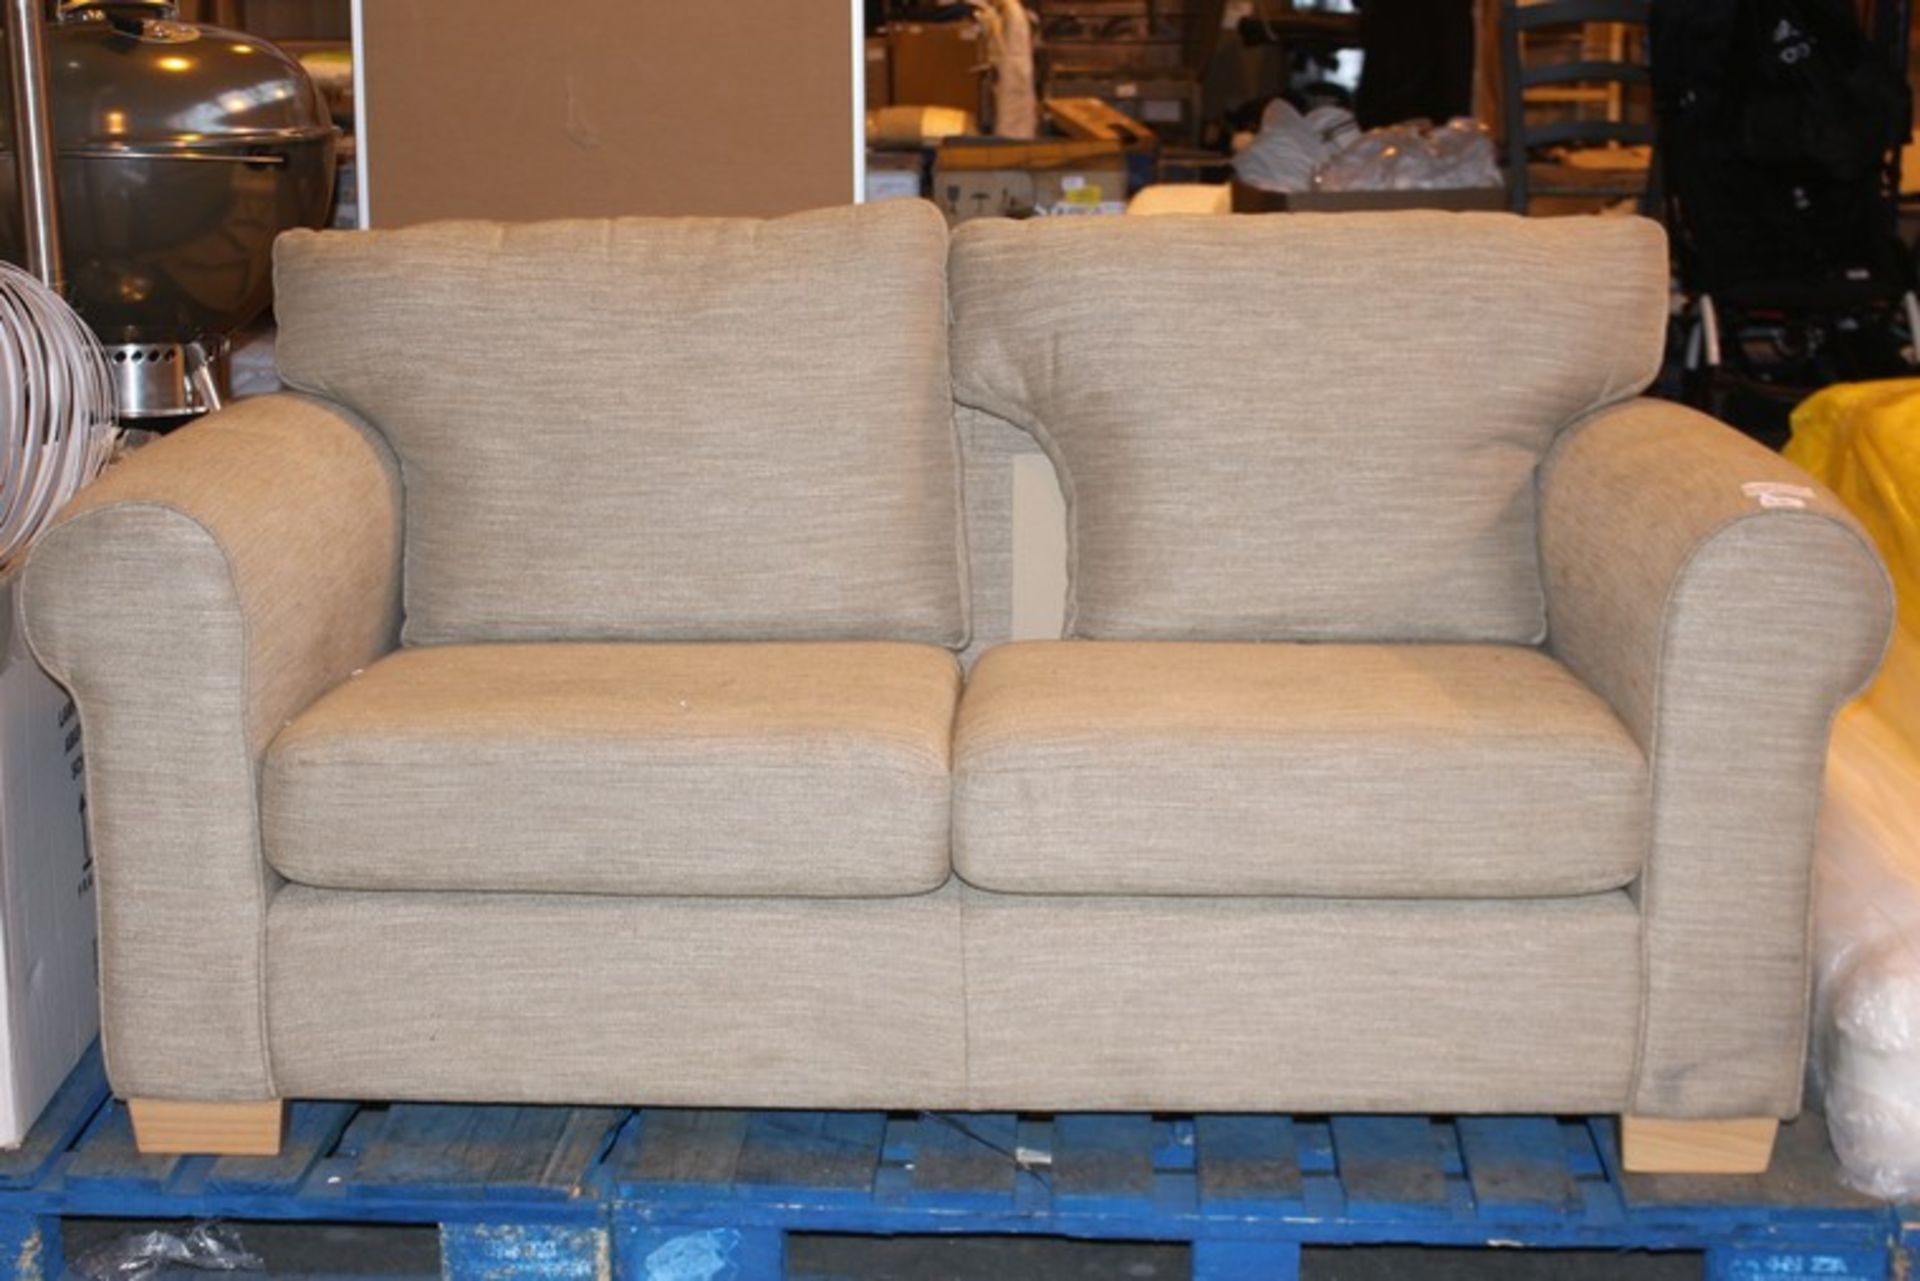 1 x MILFORD MEDIUM 2 SEATER SOFA RRP £990 (18.08.17) (2497632) *PLEASE NOTE THAT THE BID PRICE IS